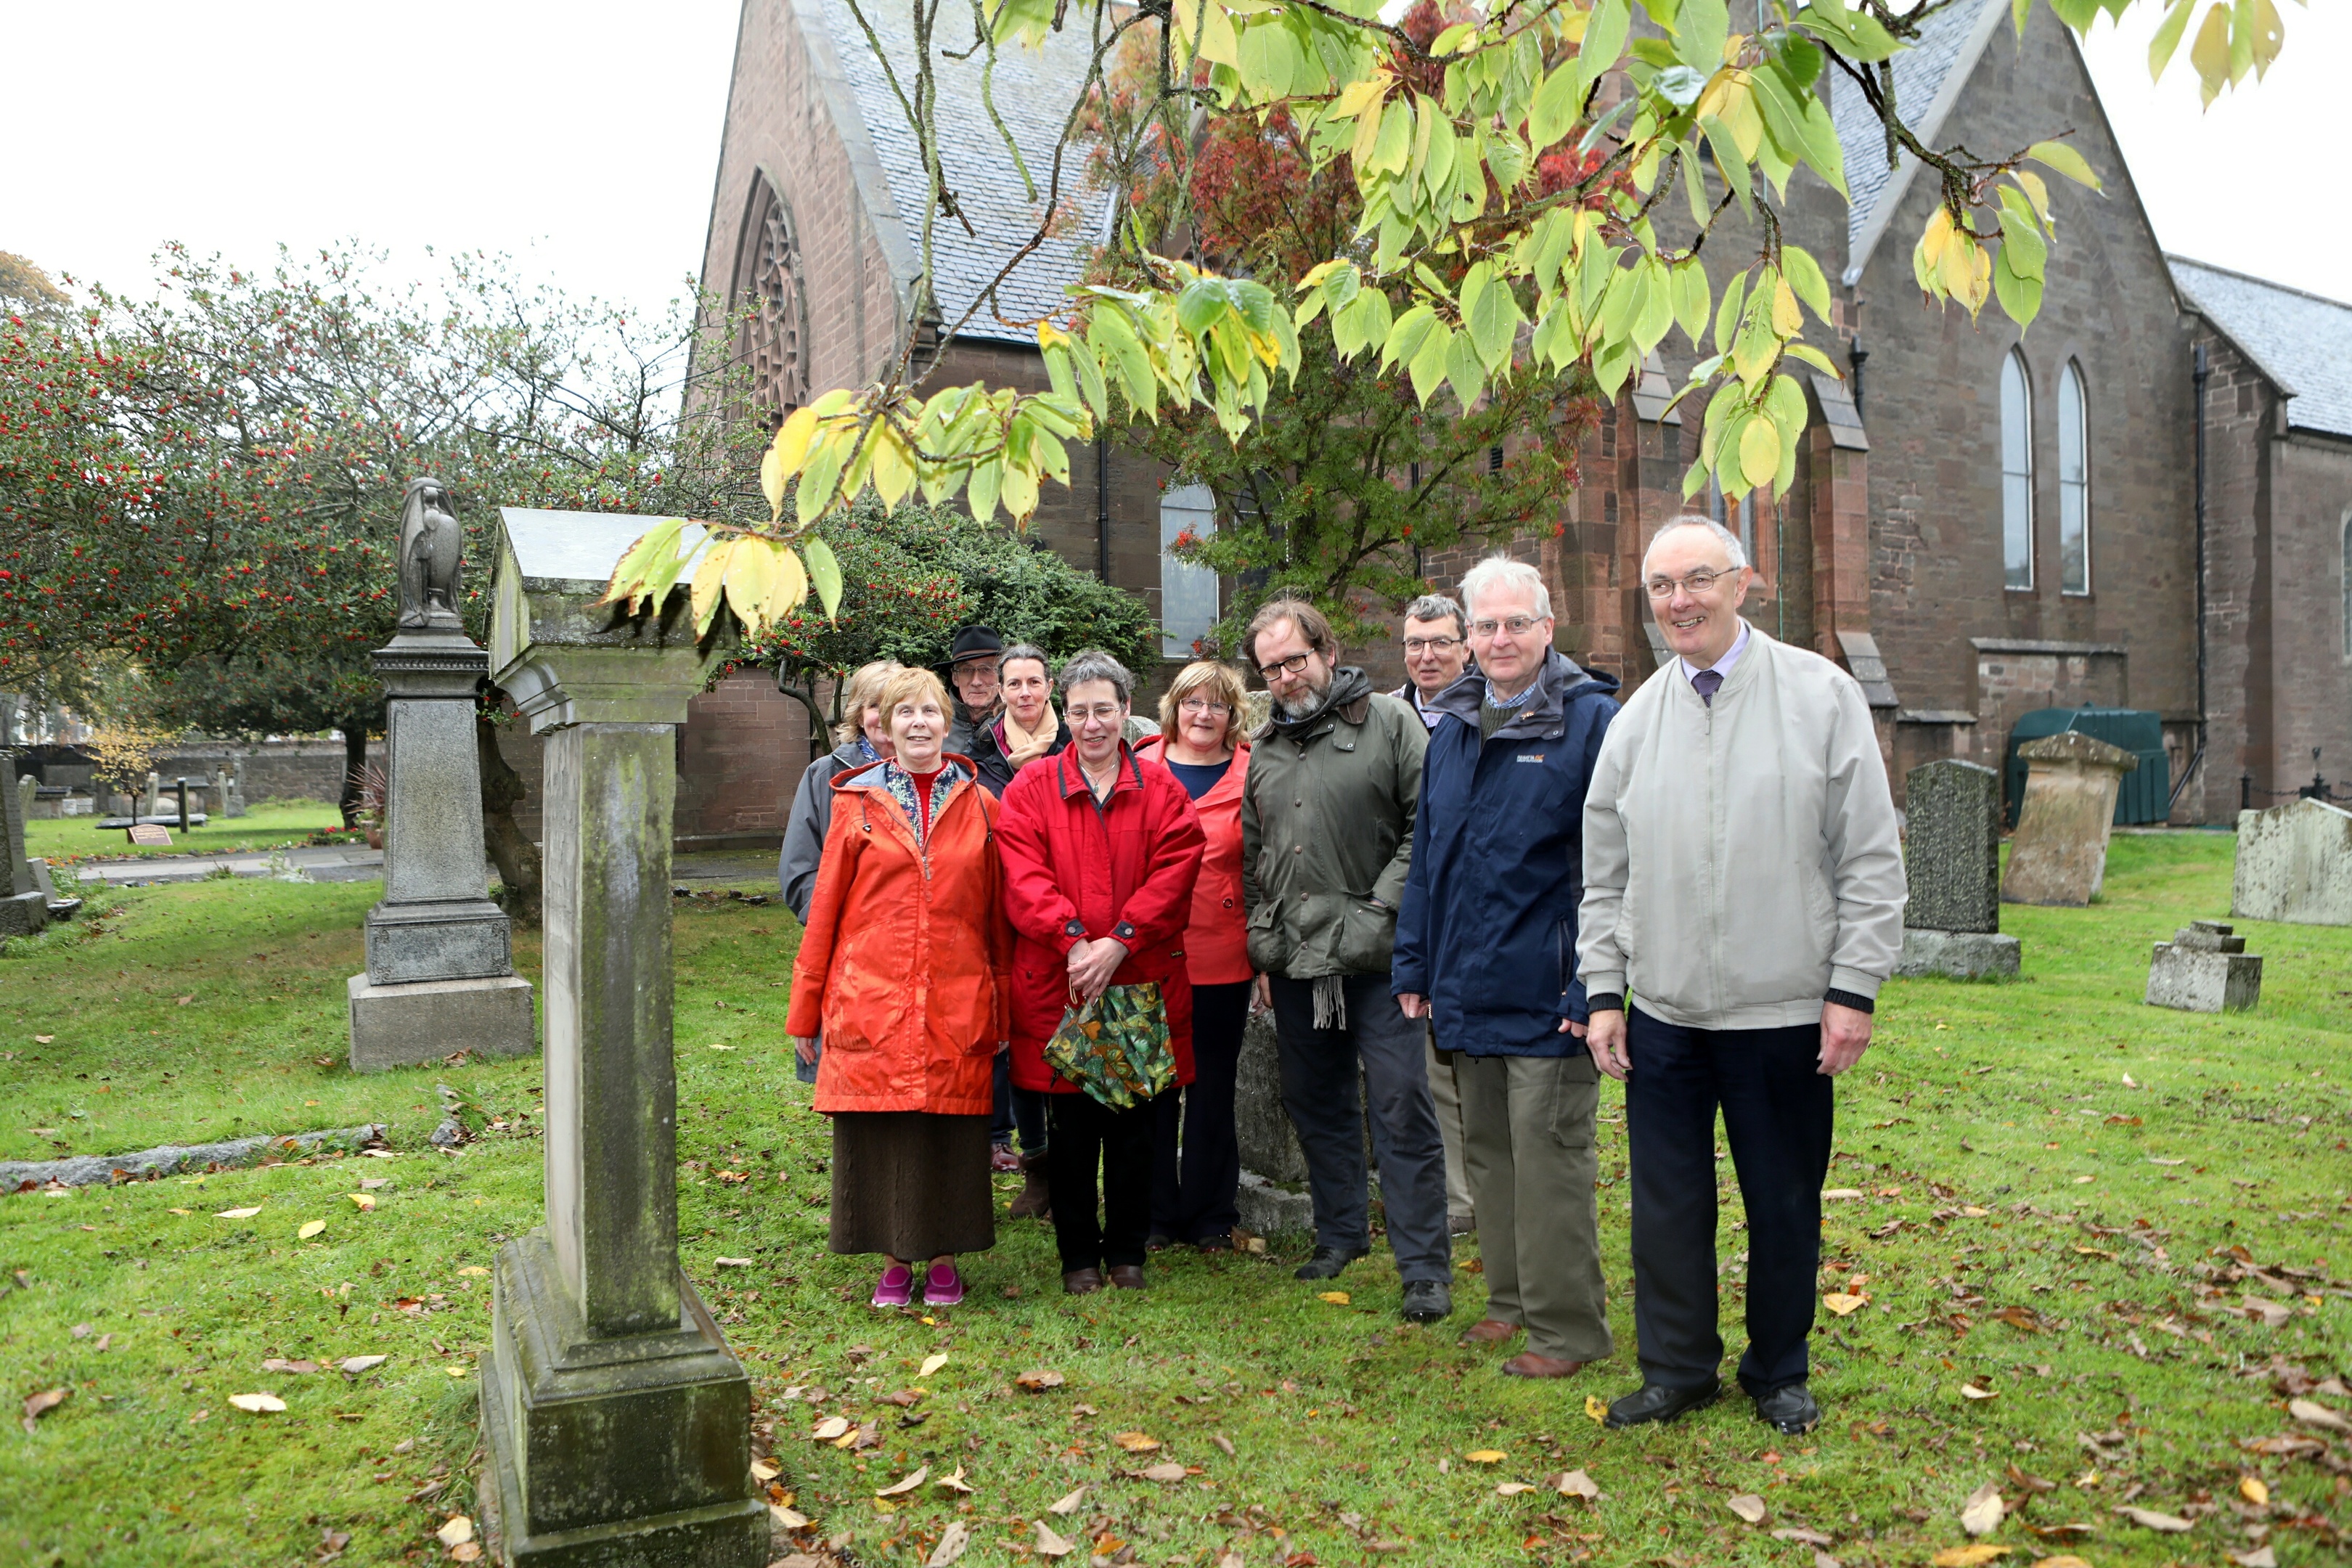 The Friends of William Lamb staged their latest walk in the town this week